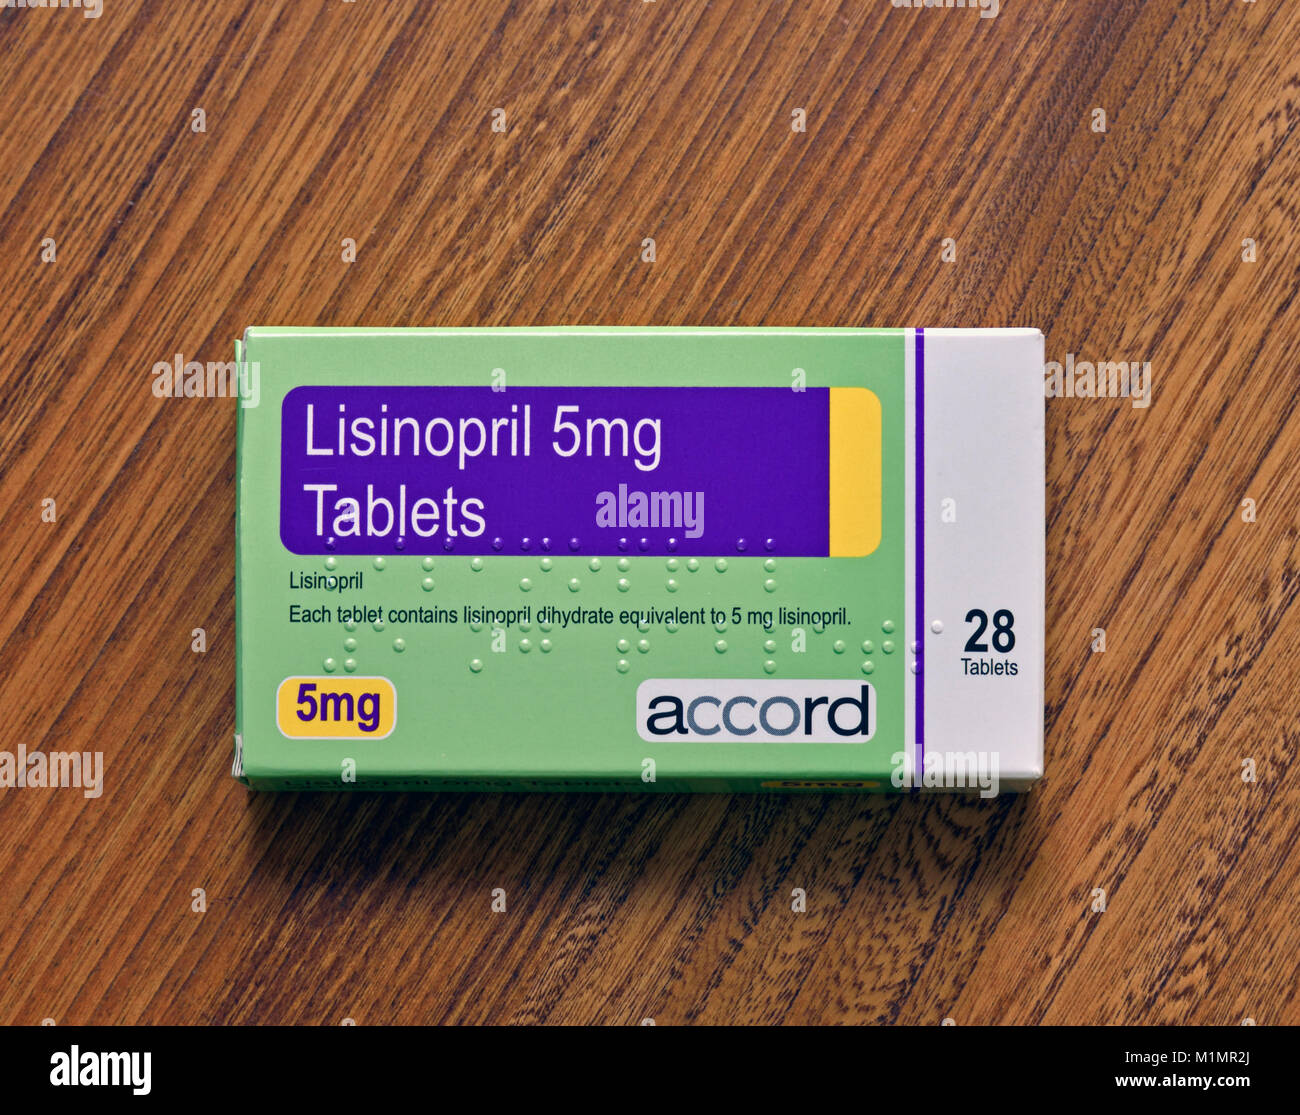 Pack of 28 Lisinopril 5mg Tablets. Each tablet contains lisinopril dihydrate equivalent to 5mg lisinopril. Accord. Stock Photo